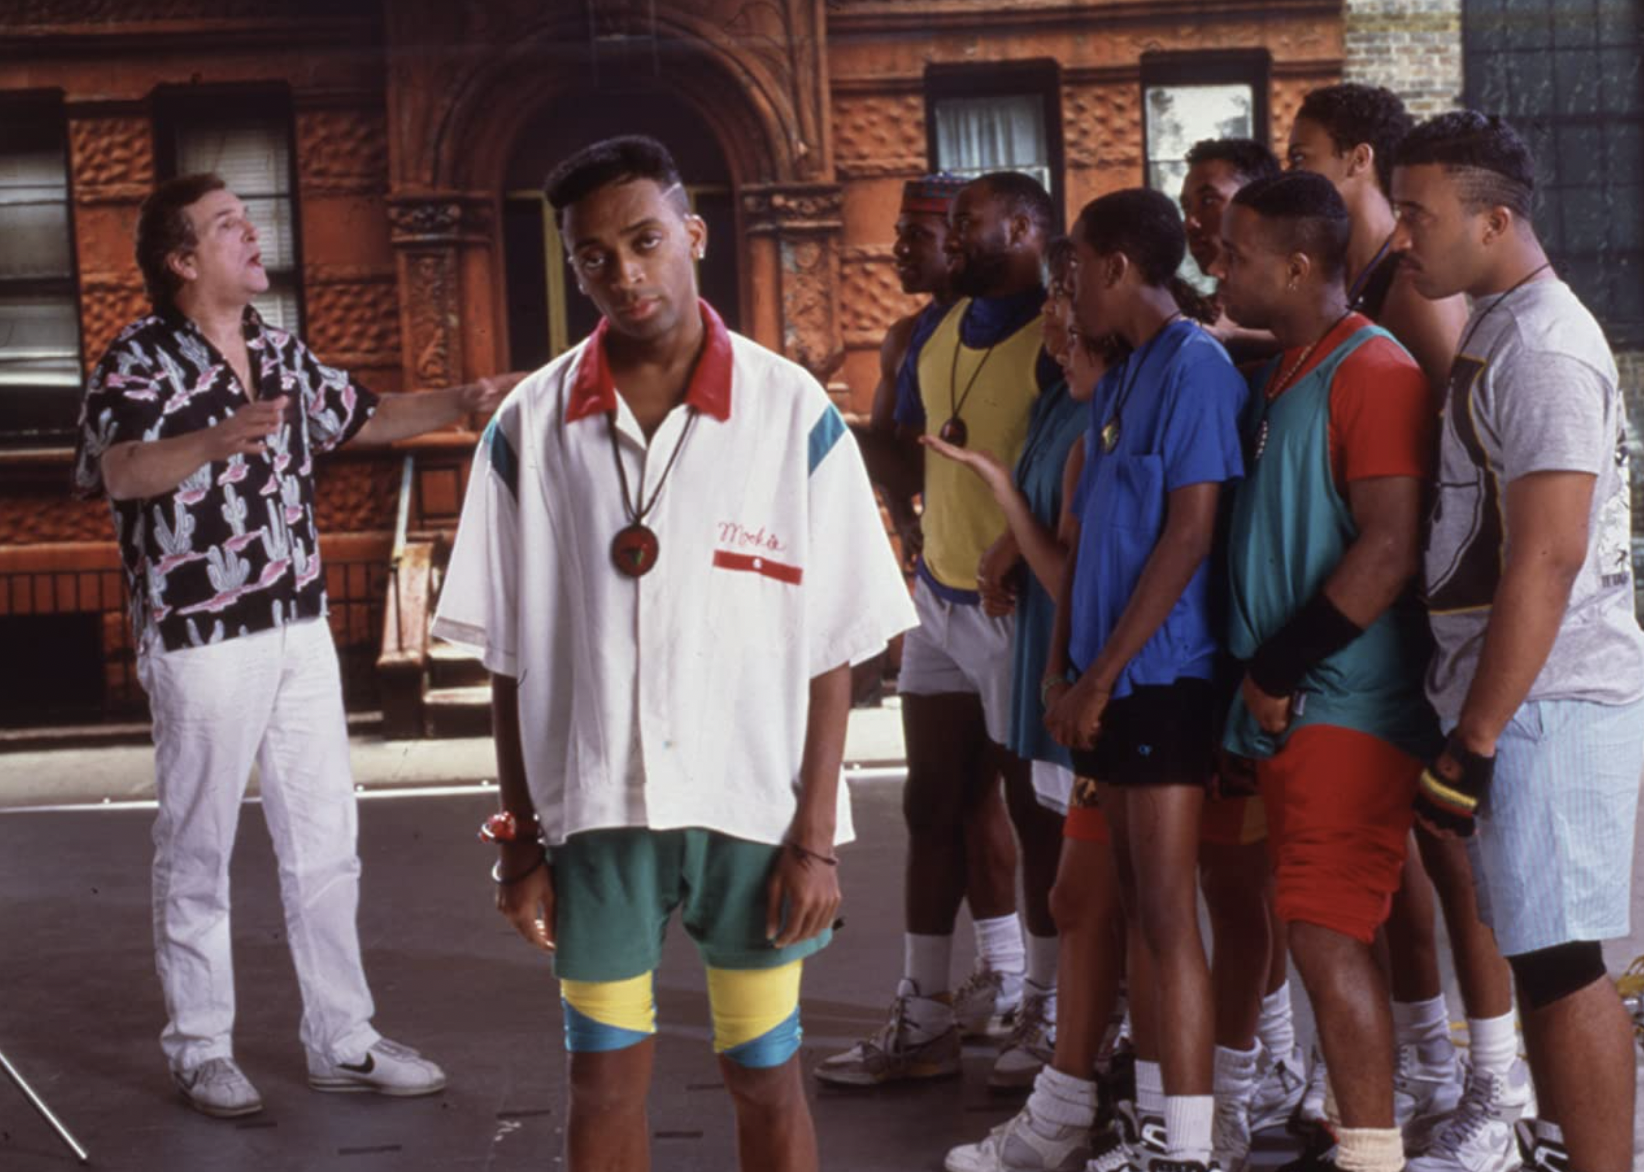 Spike Lee and Danny Aiello in "Do the Right Thing".